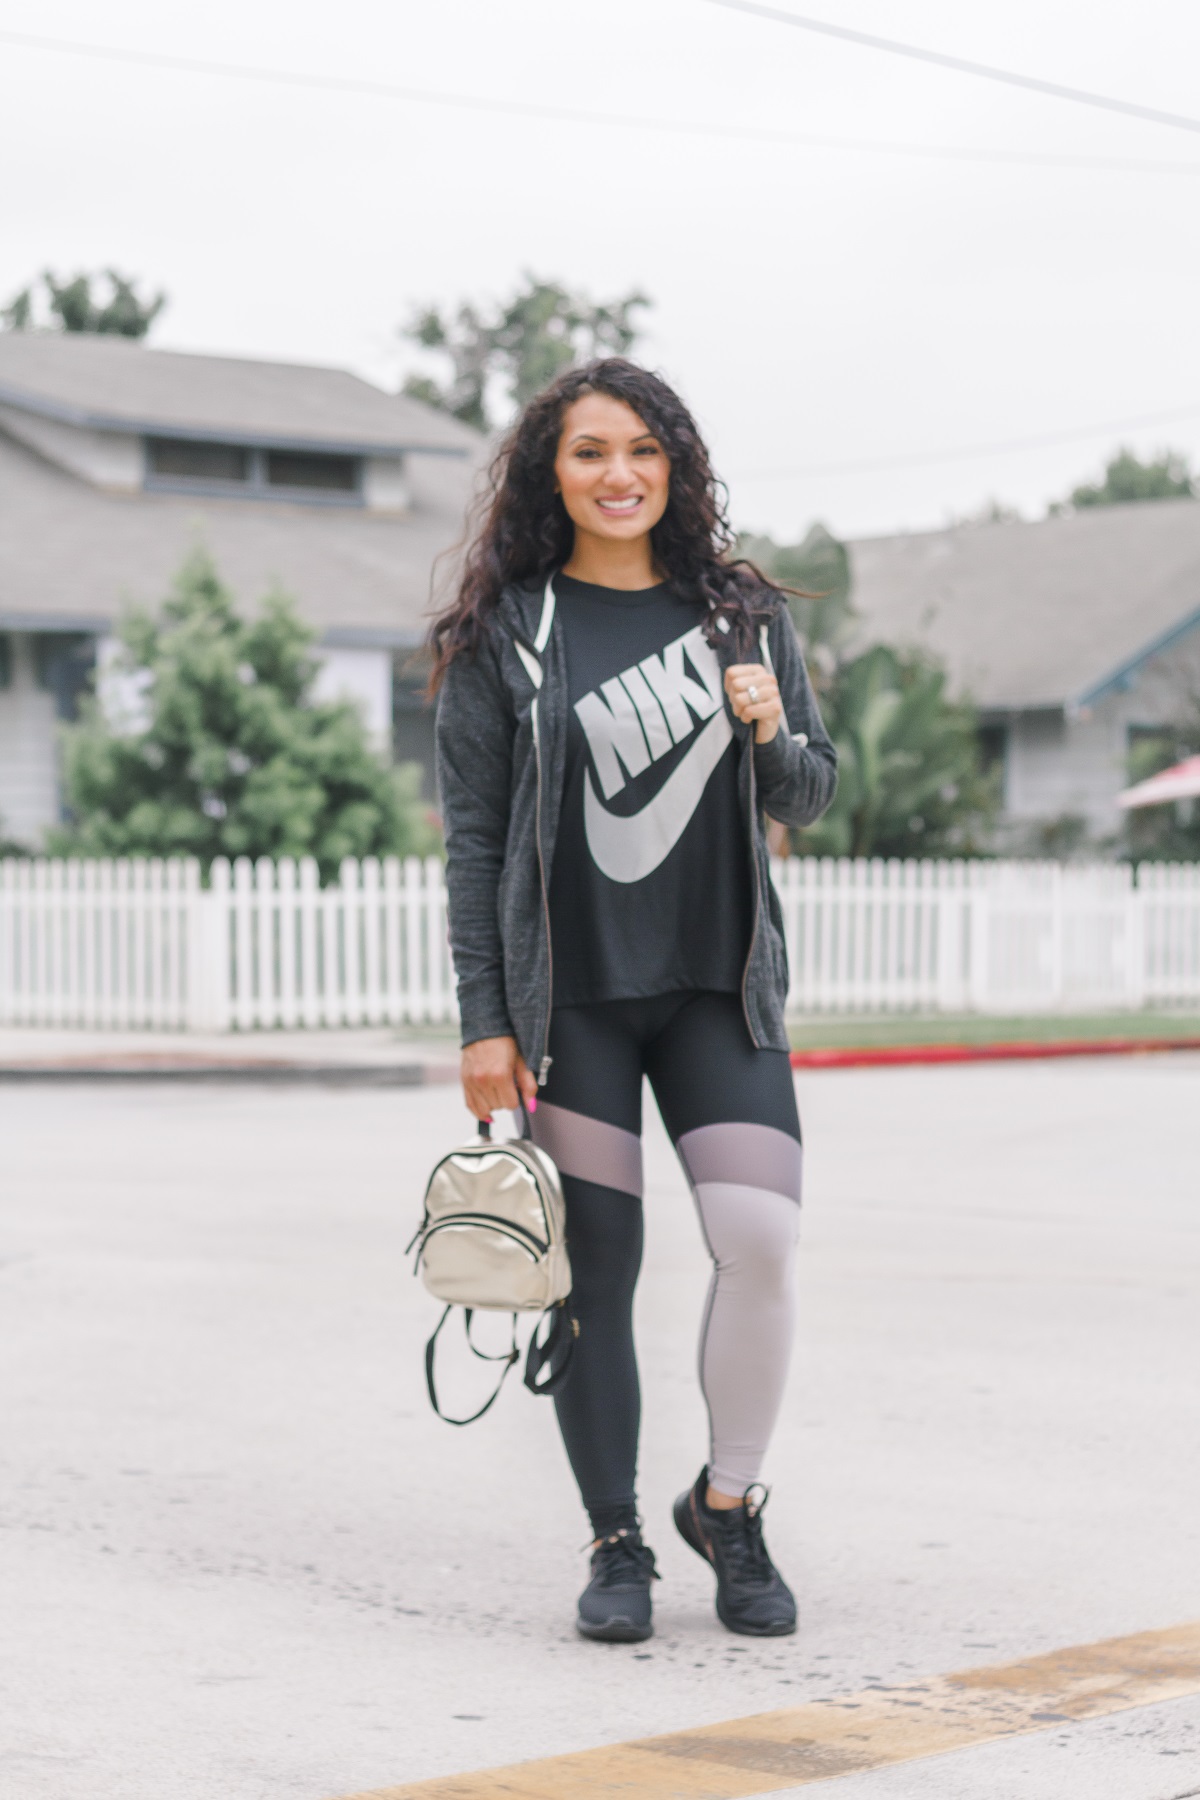 5 Fall Fitness Tips | JCPenney Fashion + Nike Athletic Wear | Debbie Savage Orange County Lifestyle Blogger of To Thine Own Style Be True